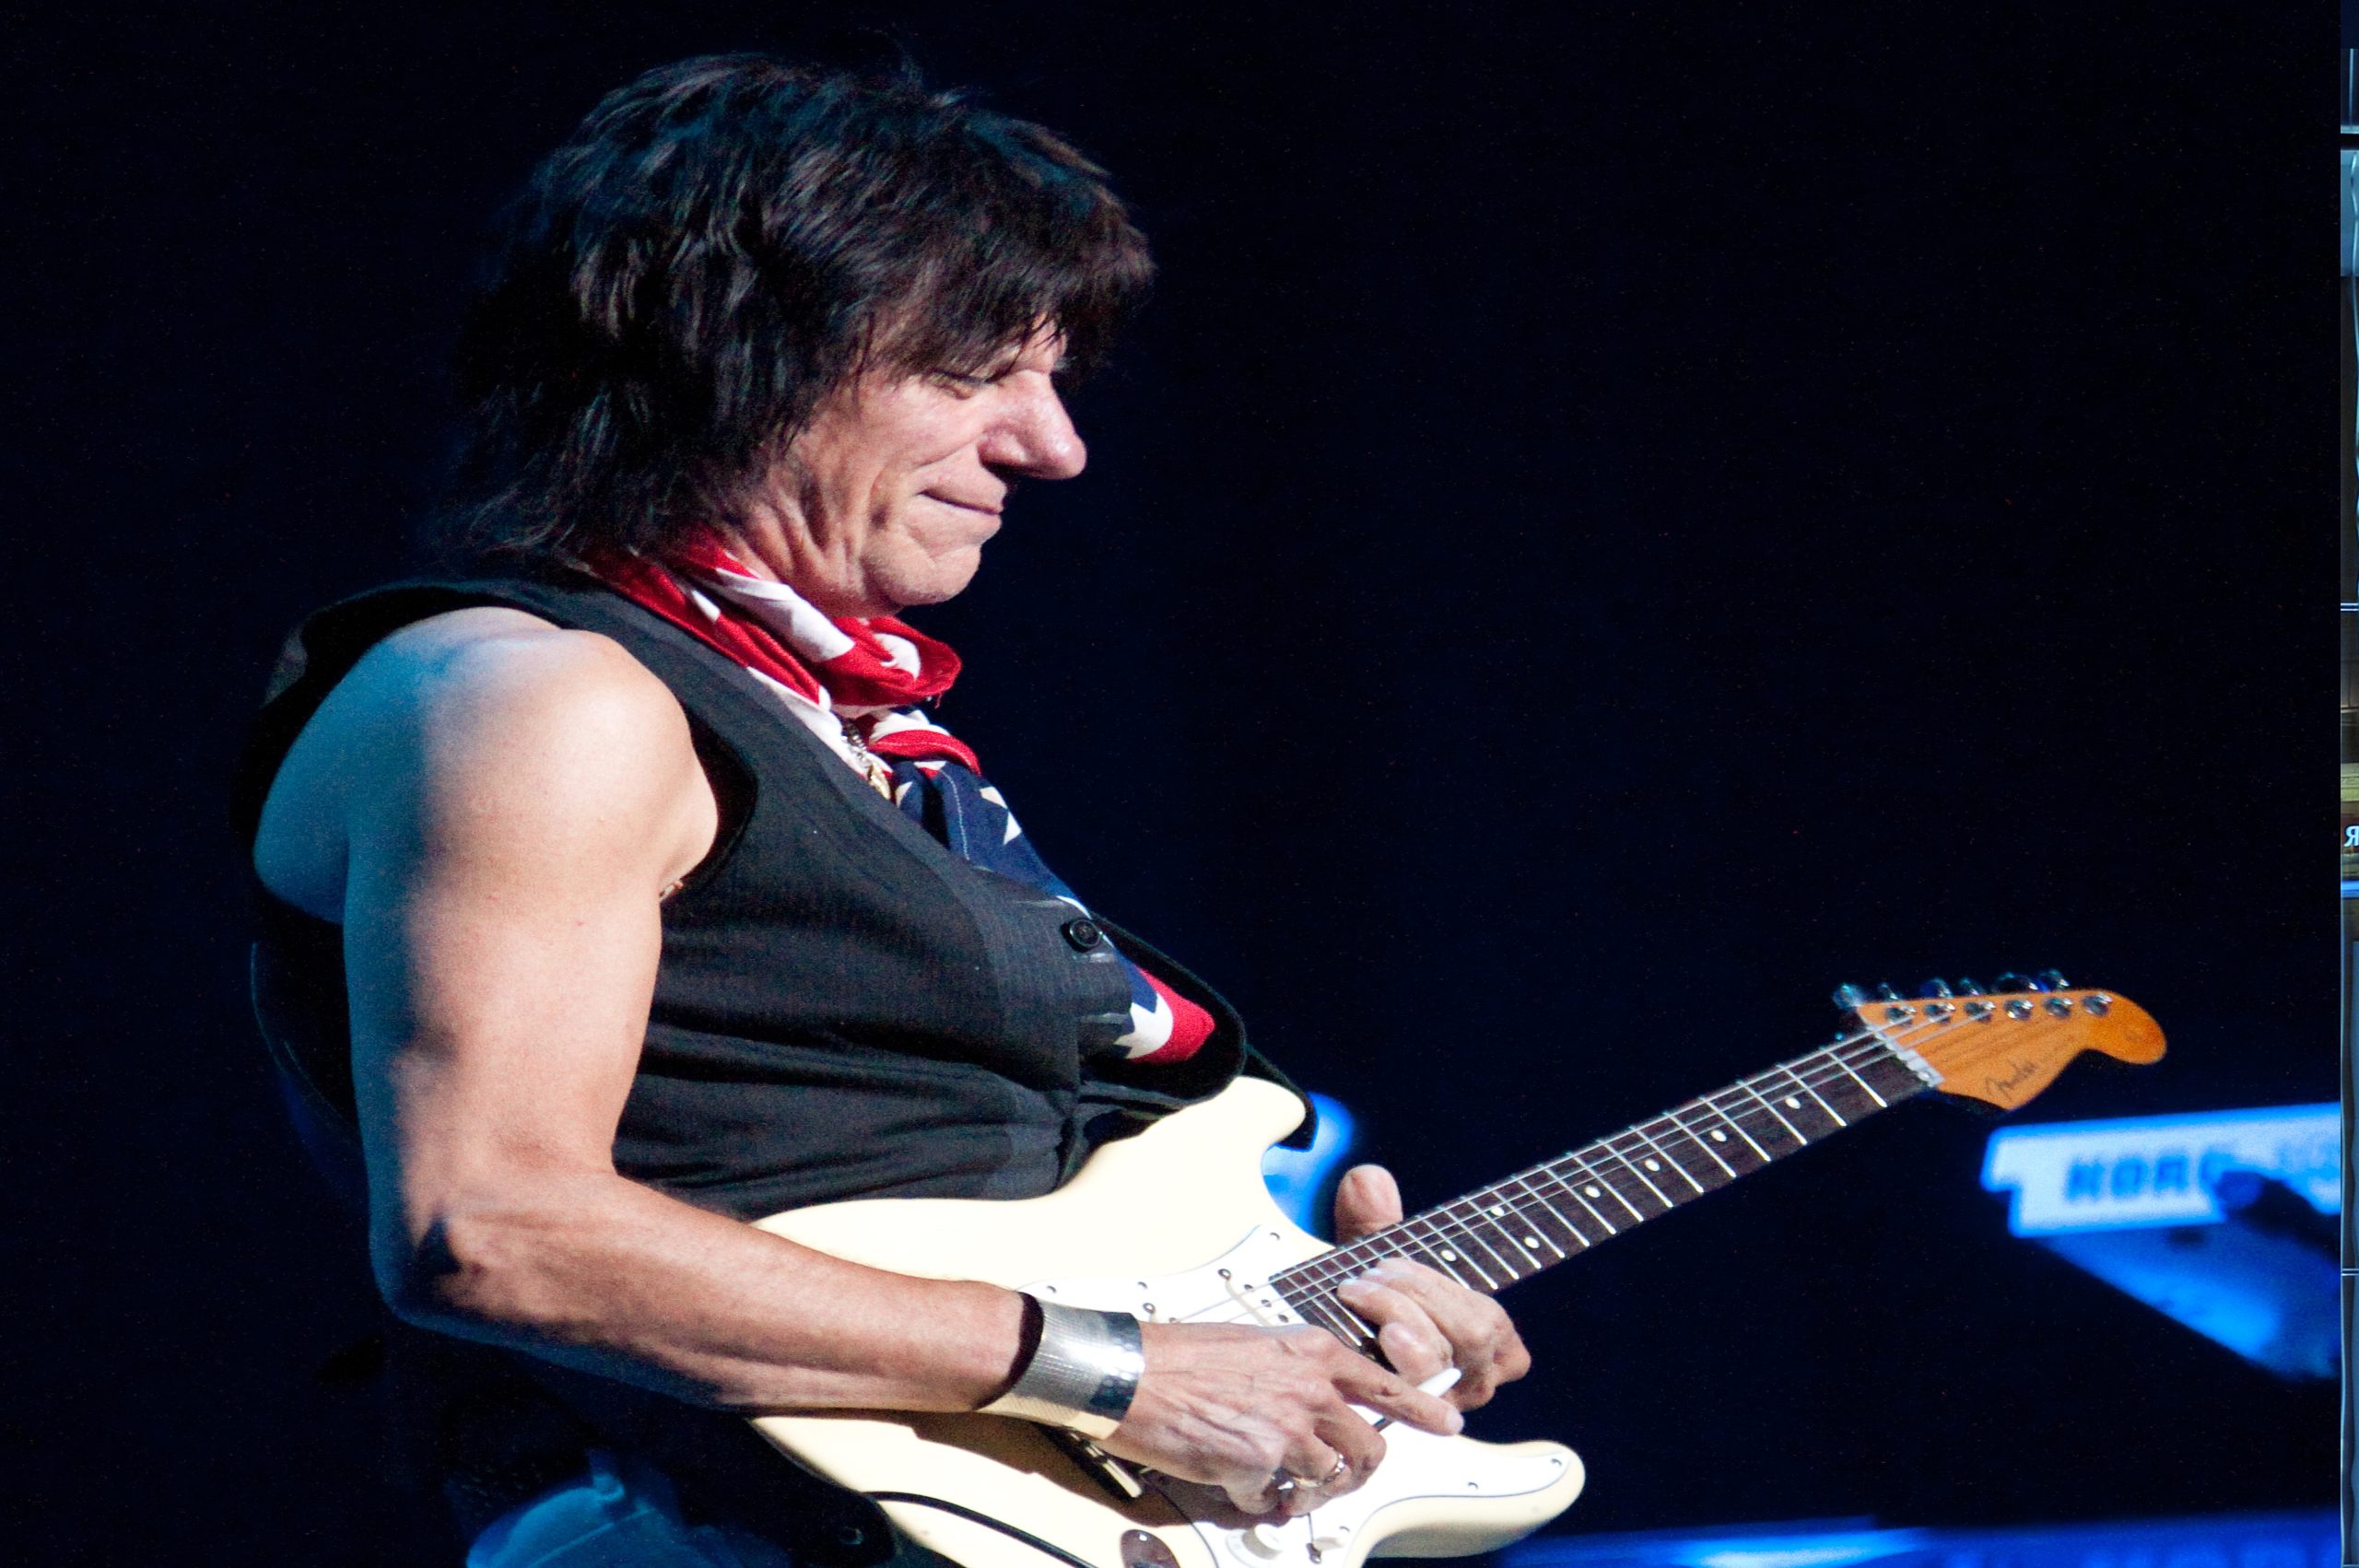 Celebrity Jeff Beck, the iconic rock guitarist, died at the age of 78 after contracting bacterial meningitis